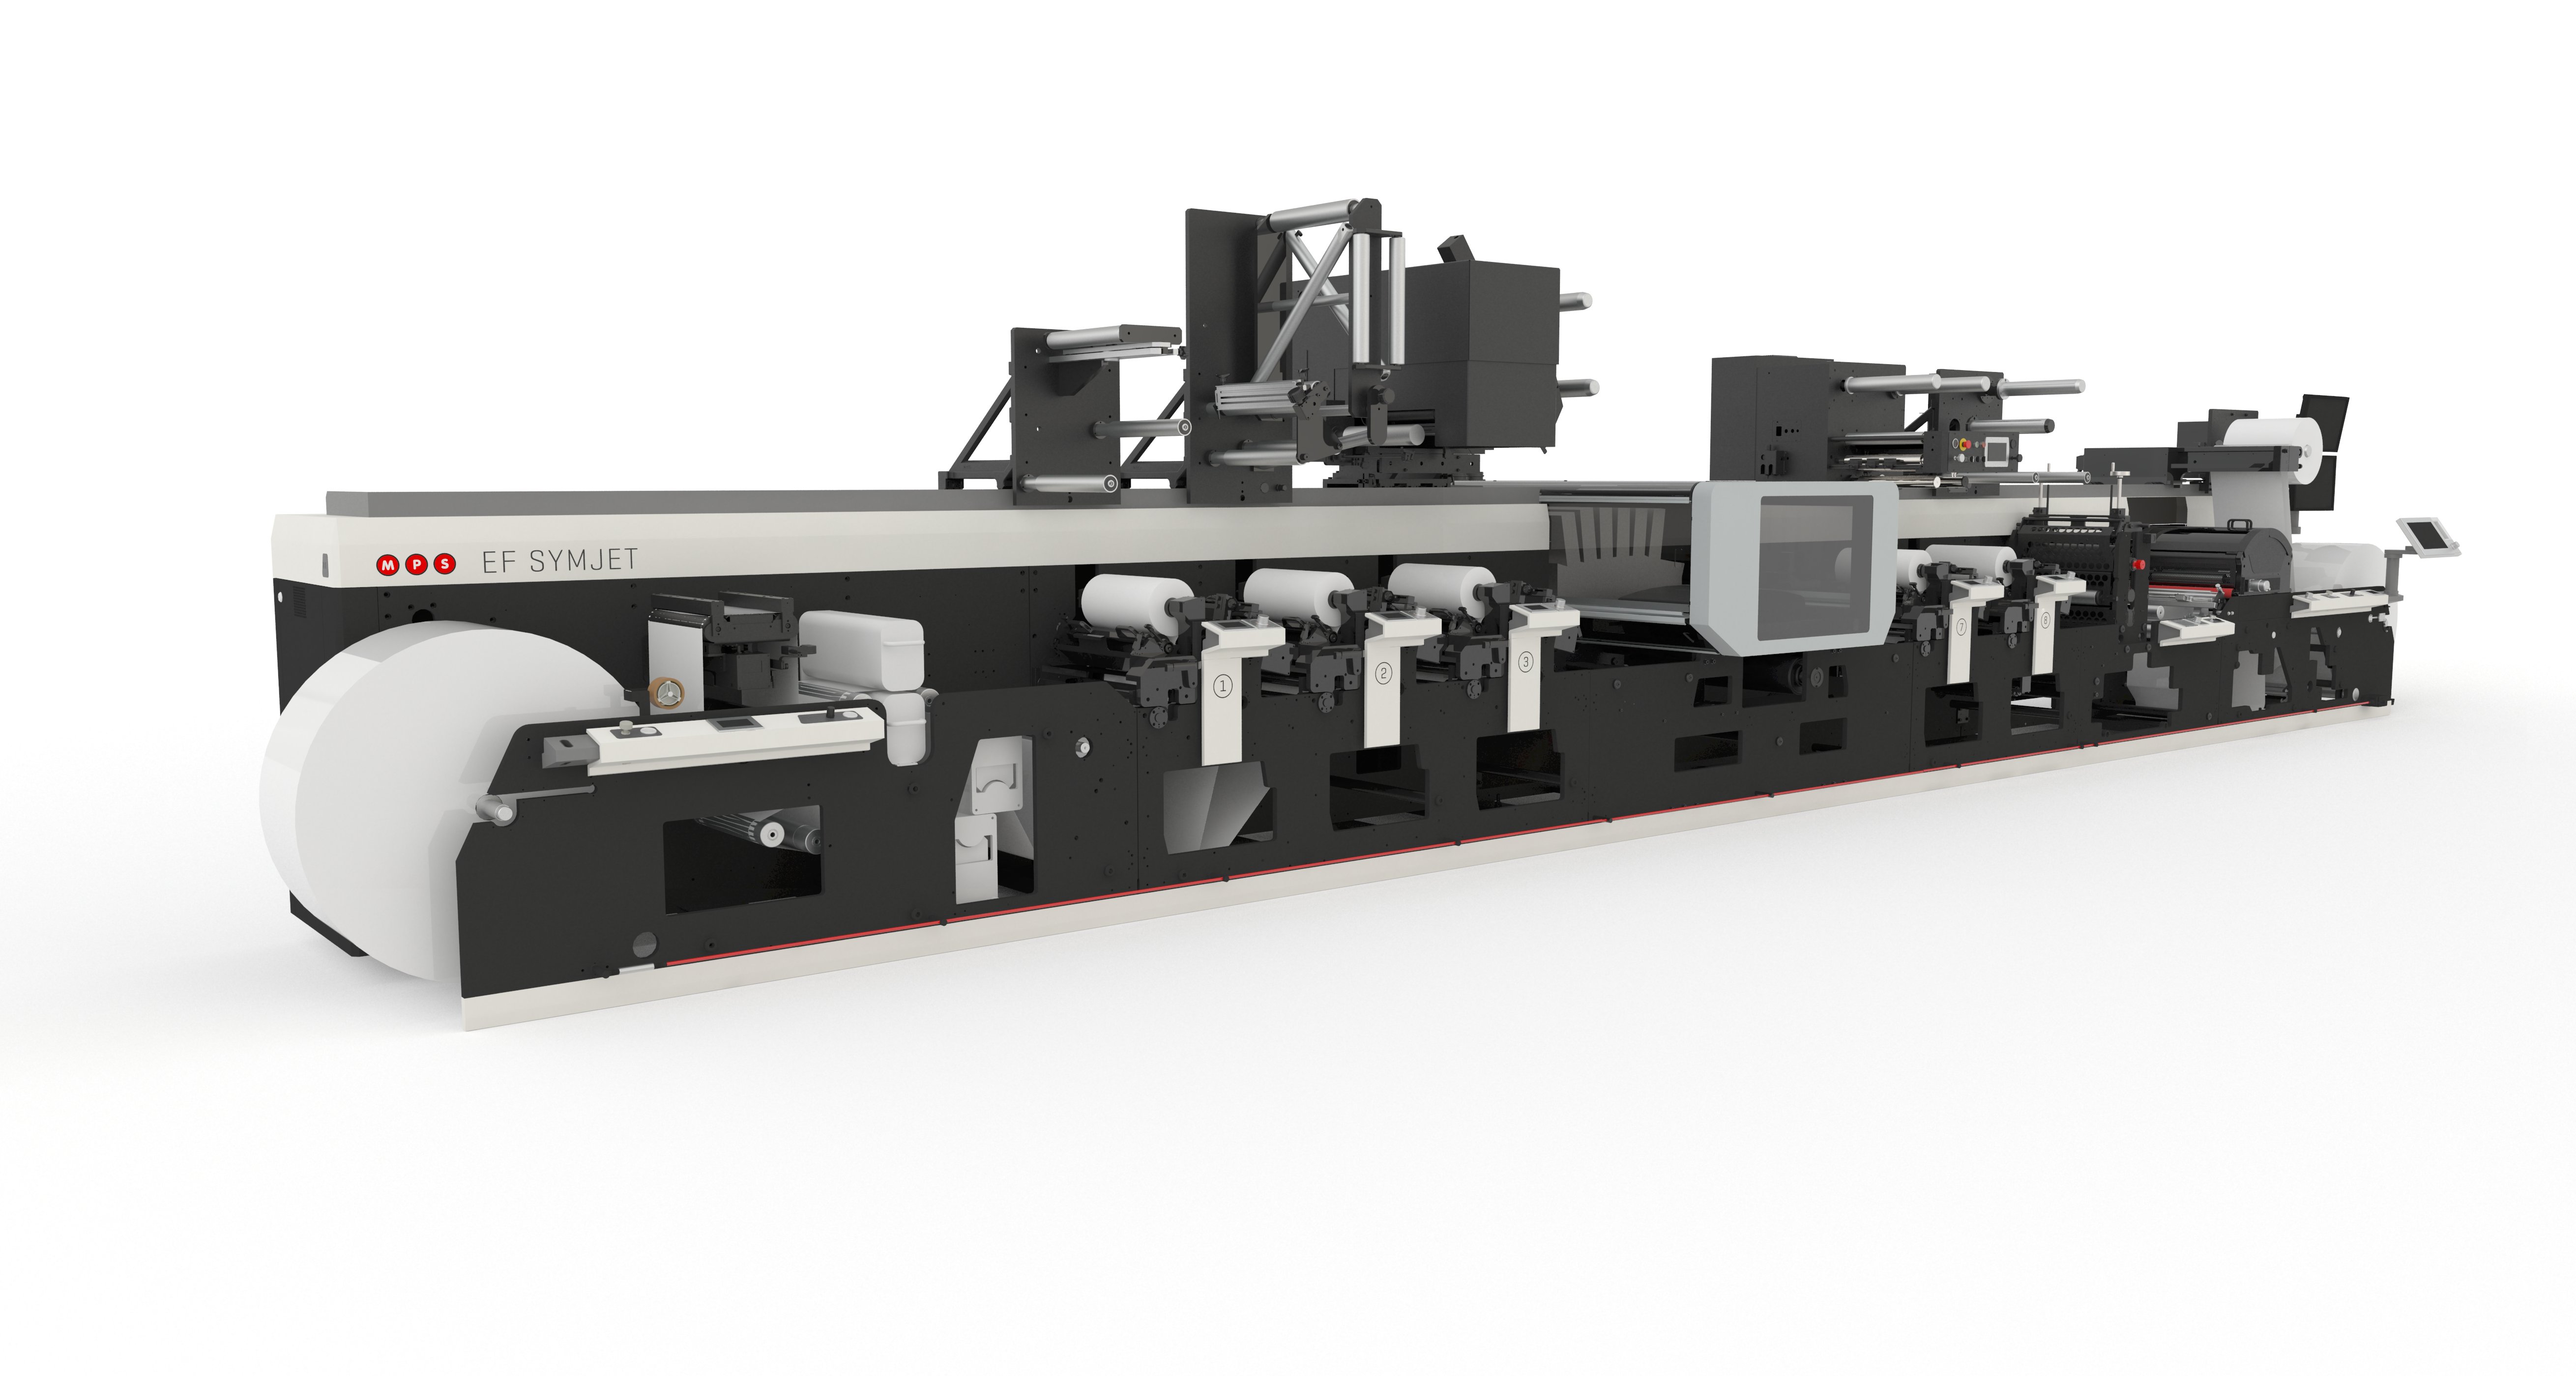 The hybrid MPS EF SYMJET press will be presented with an exclusive Domino N617i unit and in a wider 17 inch 430 mm width